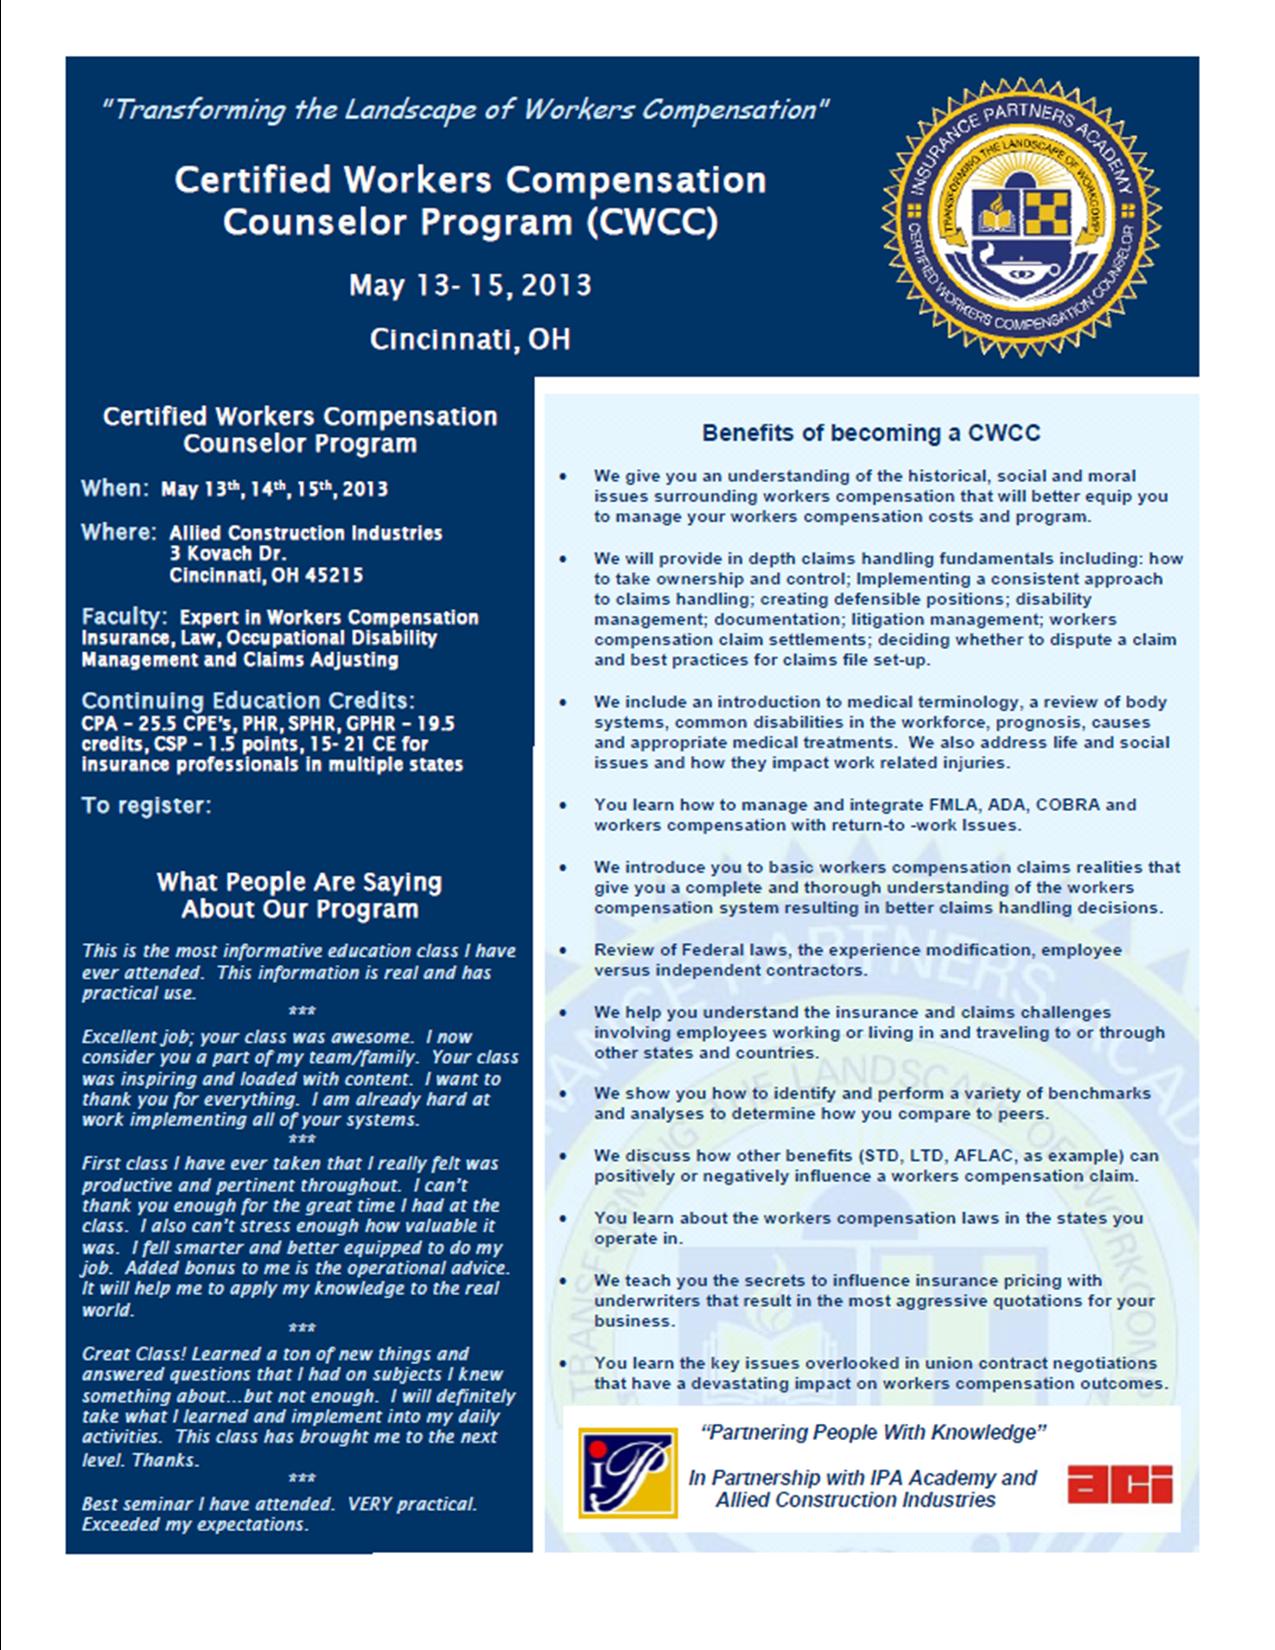 Certified Workers Compensation Counselor Program 2013